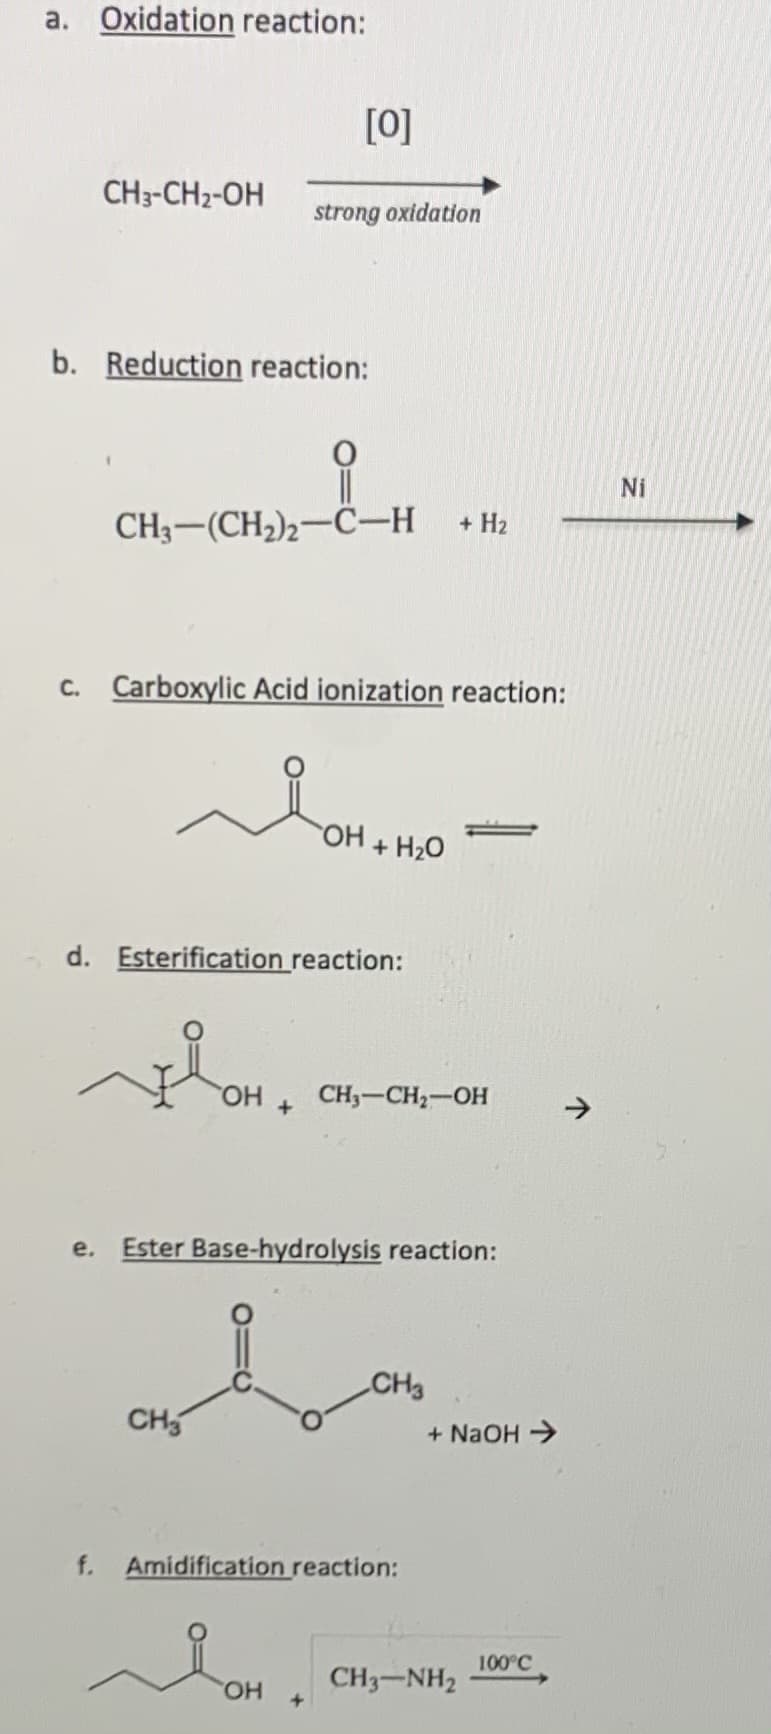 a. Oxidation reaction:
[0]
CH3-CH2-OH
strong oxidation
b. Reduction reaction:
Ni
CH3-(CH2)2-C–H
+ H2
c. Carboxylic Acid ionization reaction:
OH + H2O
d. Esterification reaction:
CH3-CH2-OH
е.
Ester Base-hydrolysis reaction:
CH3
CH5
+ NaOH >
f.
Amidification reaction:
100°C
CH3-NH2
HO
个
